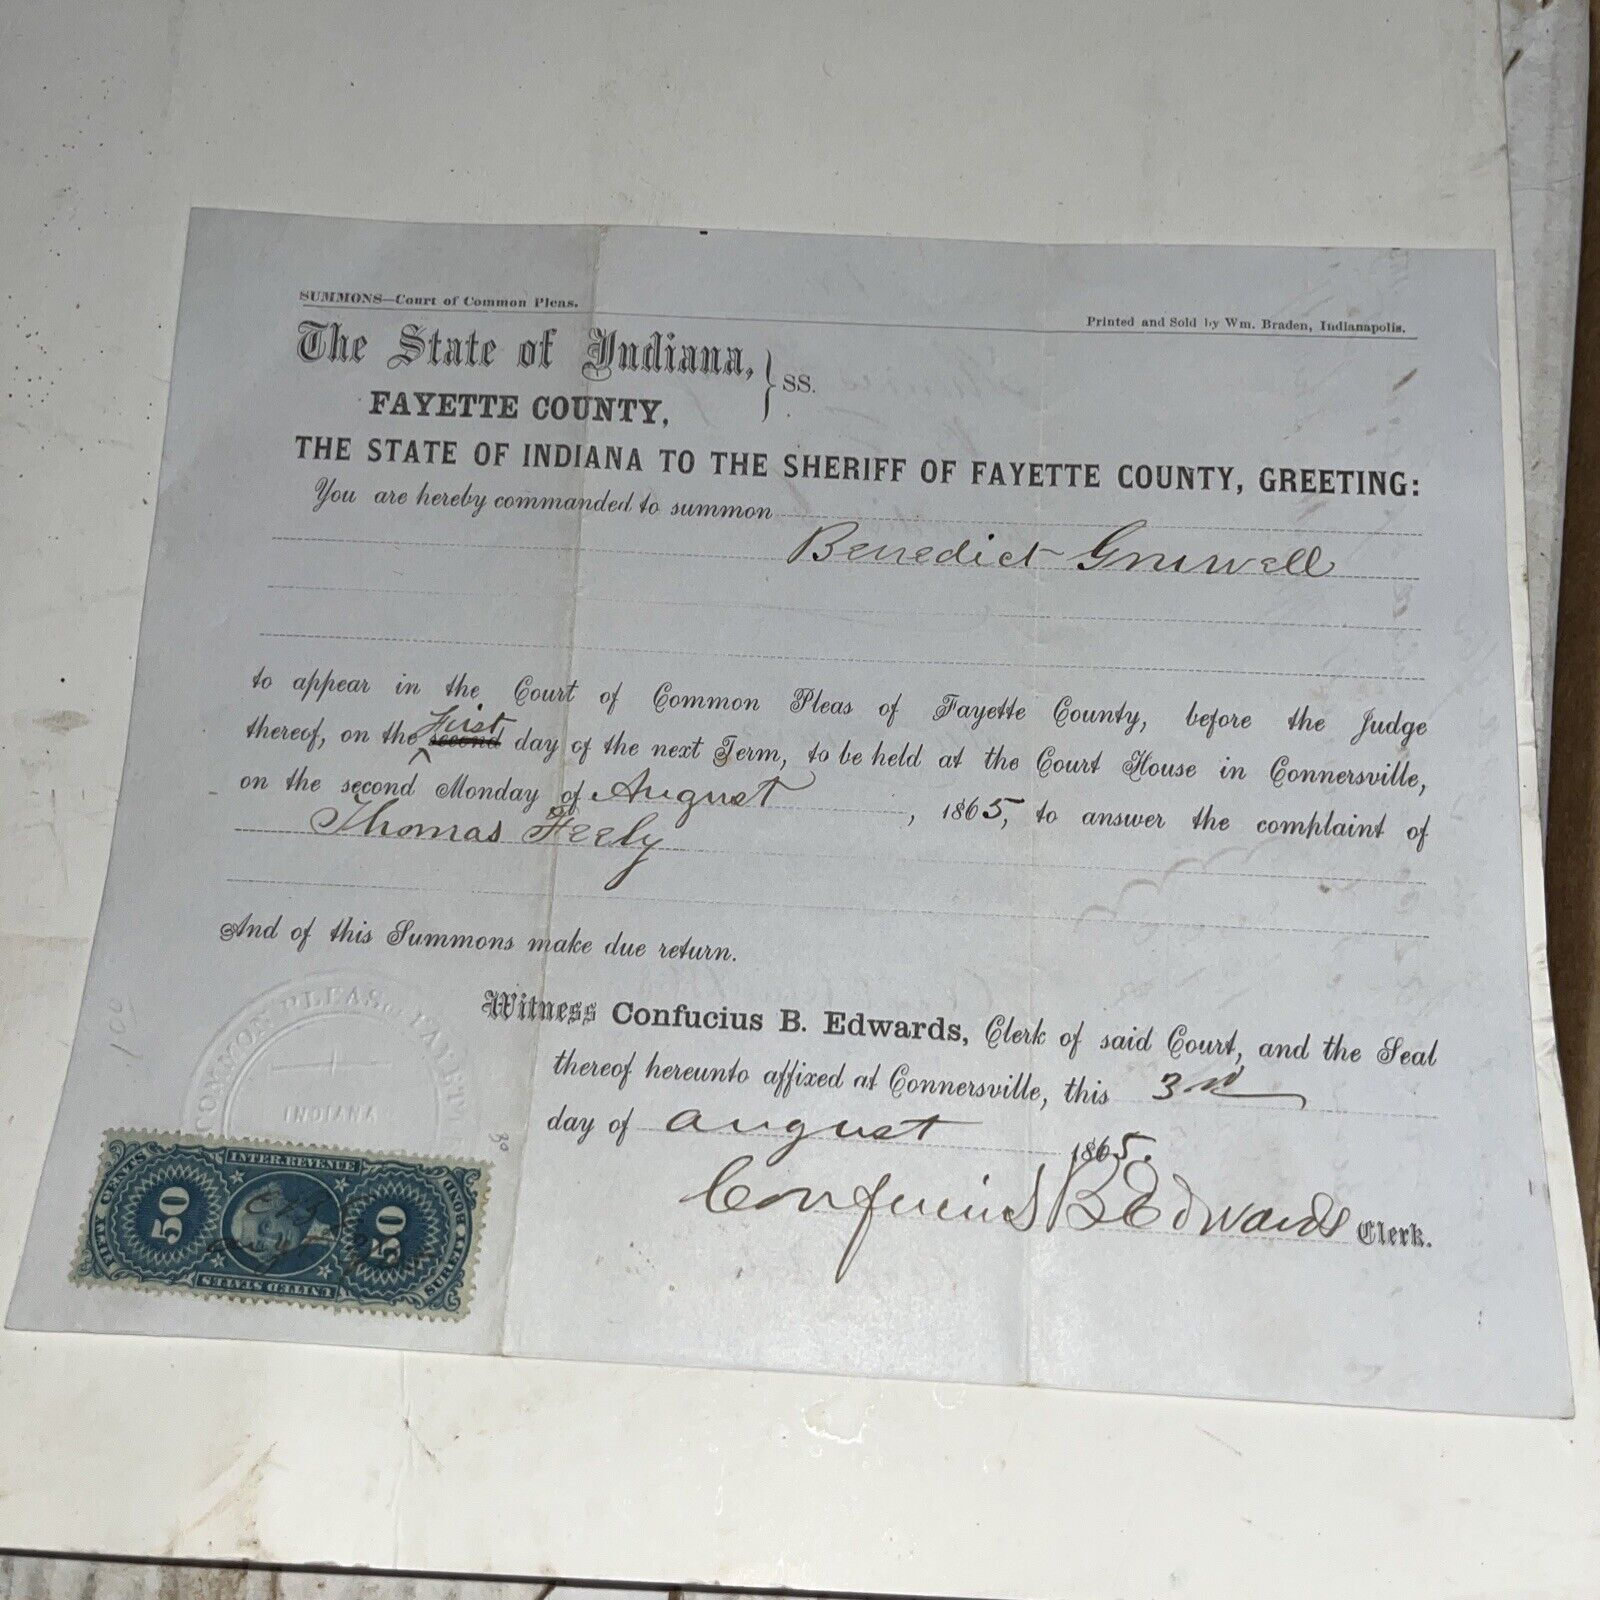 Antique 1865 Legal Summons Order to Sheriff from Fayette County Indiana Court